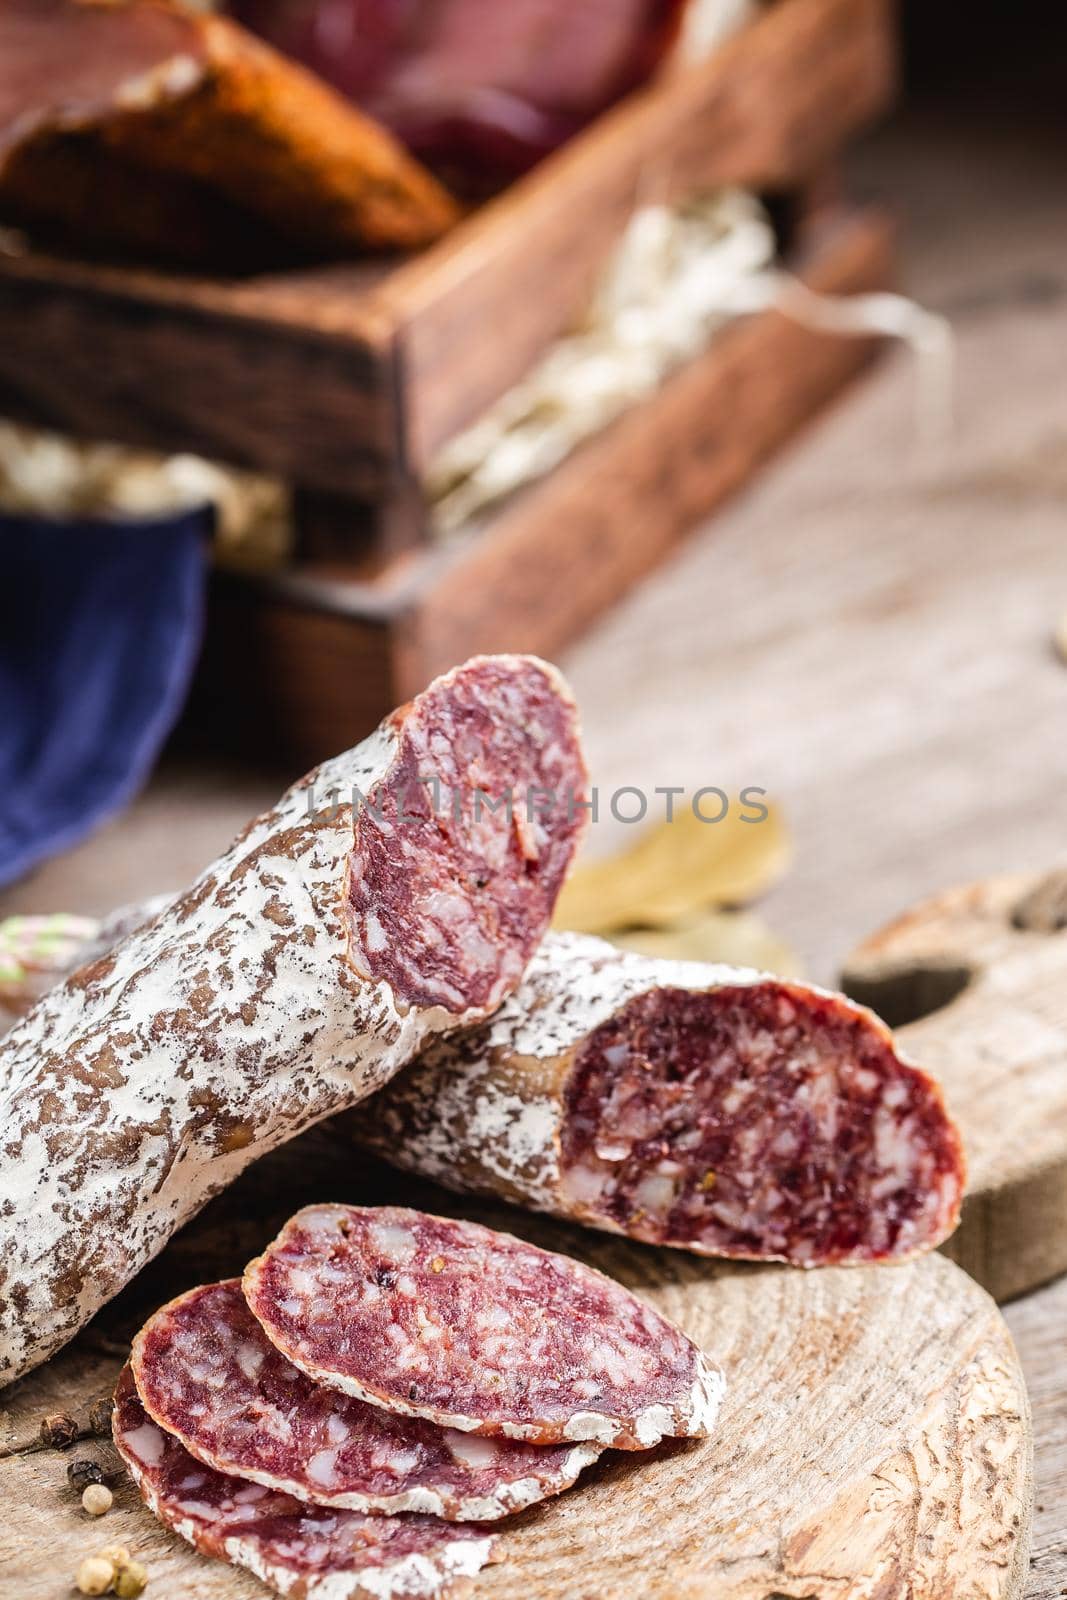 Smoked sliced salami on a old wooden table. Sausages with edible mold